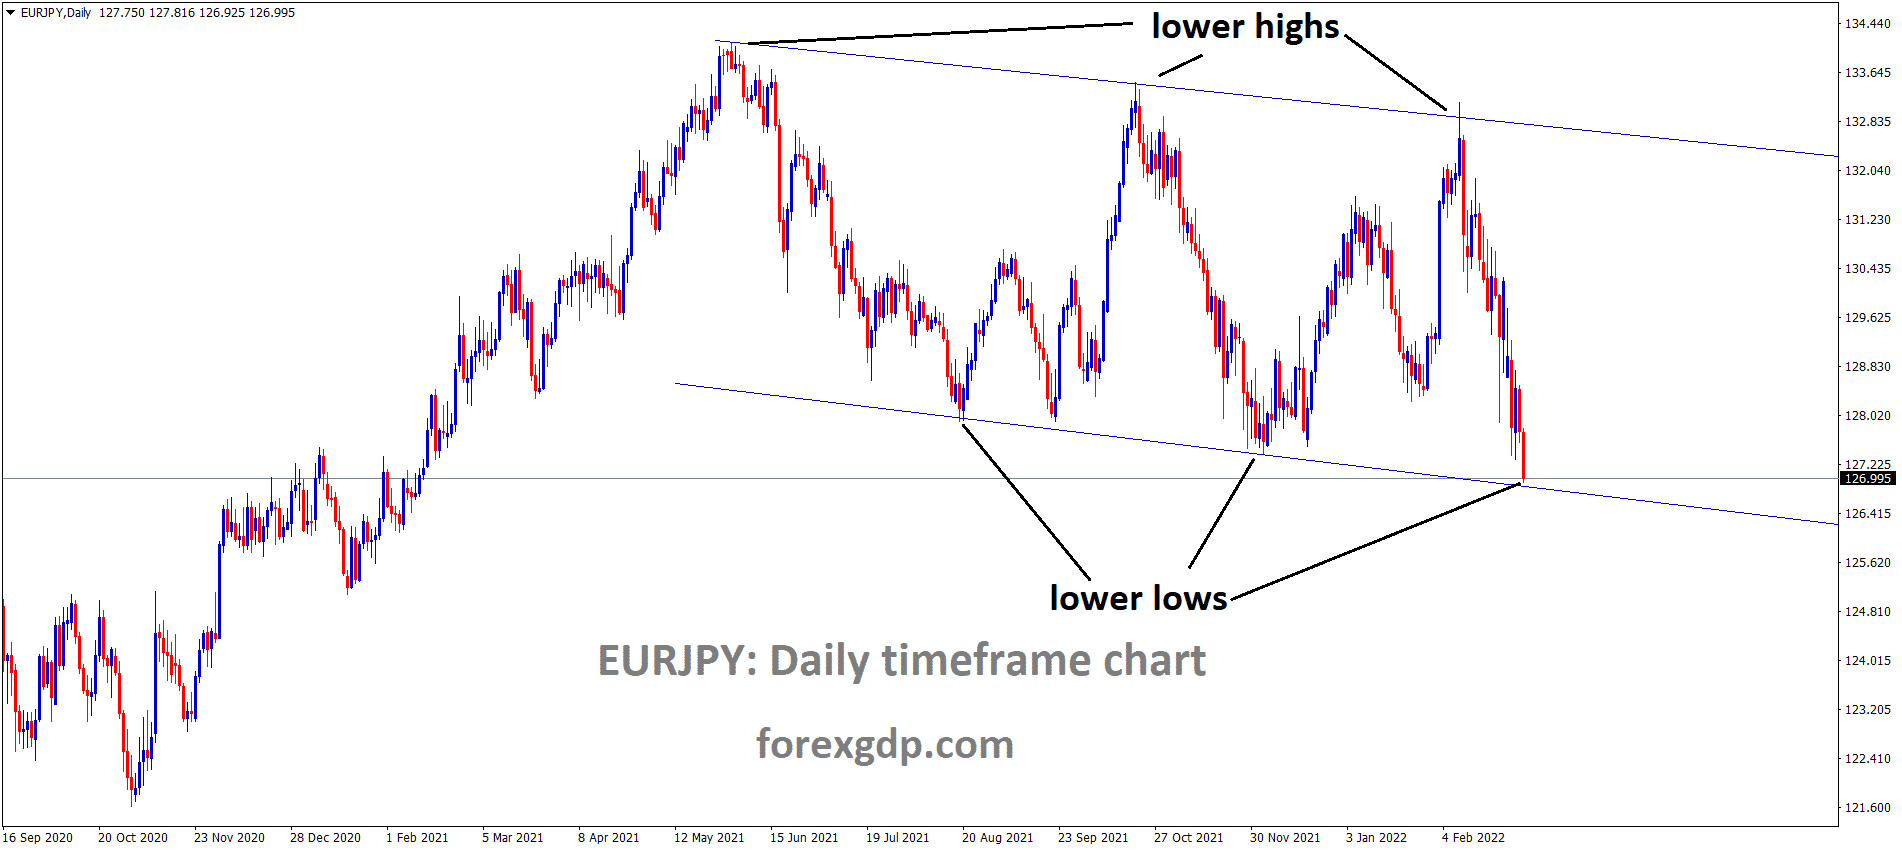 EURJPY is moving in the Descending channel and the market has reached the lower low area of the channel.